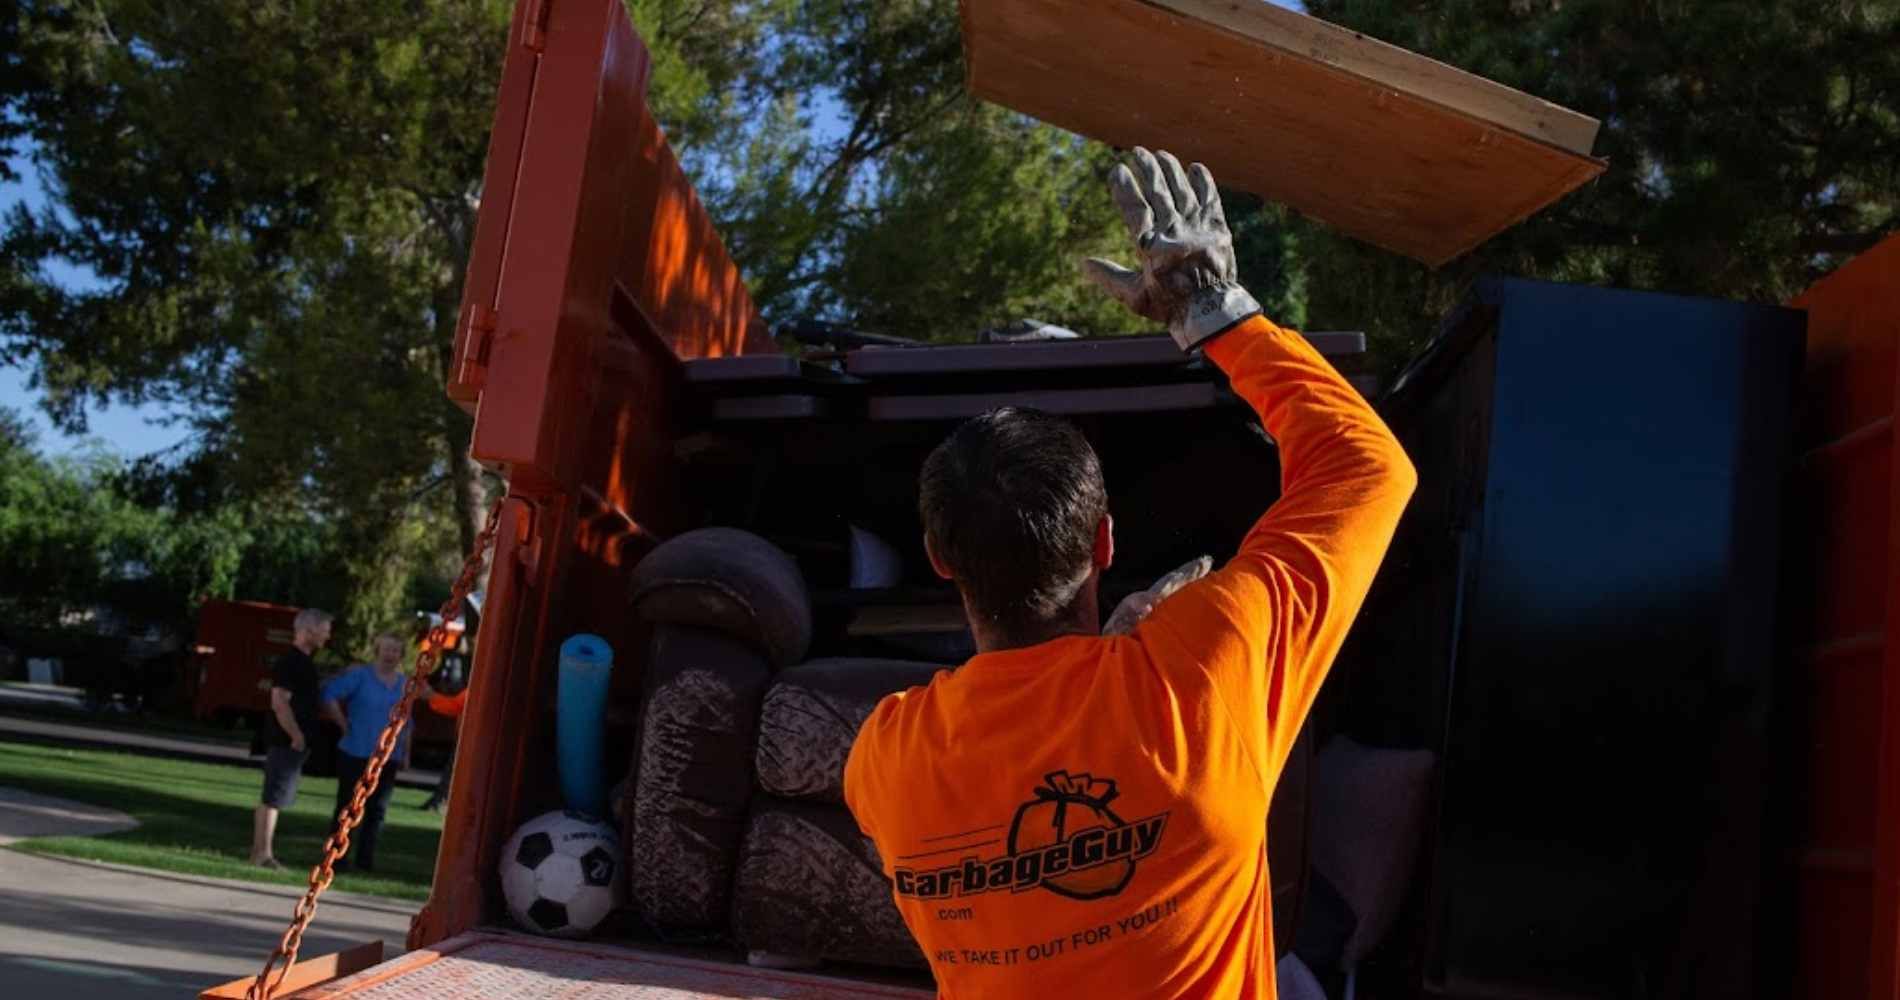 #1 for Eviction Cleanout in Mesa, AZ with Over 1200 5-Star Reviews!